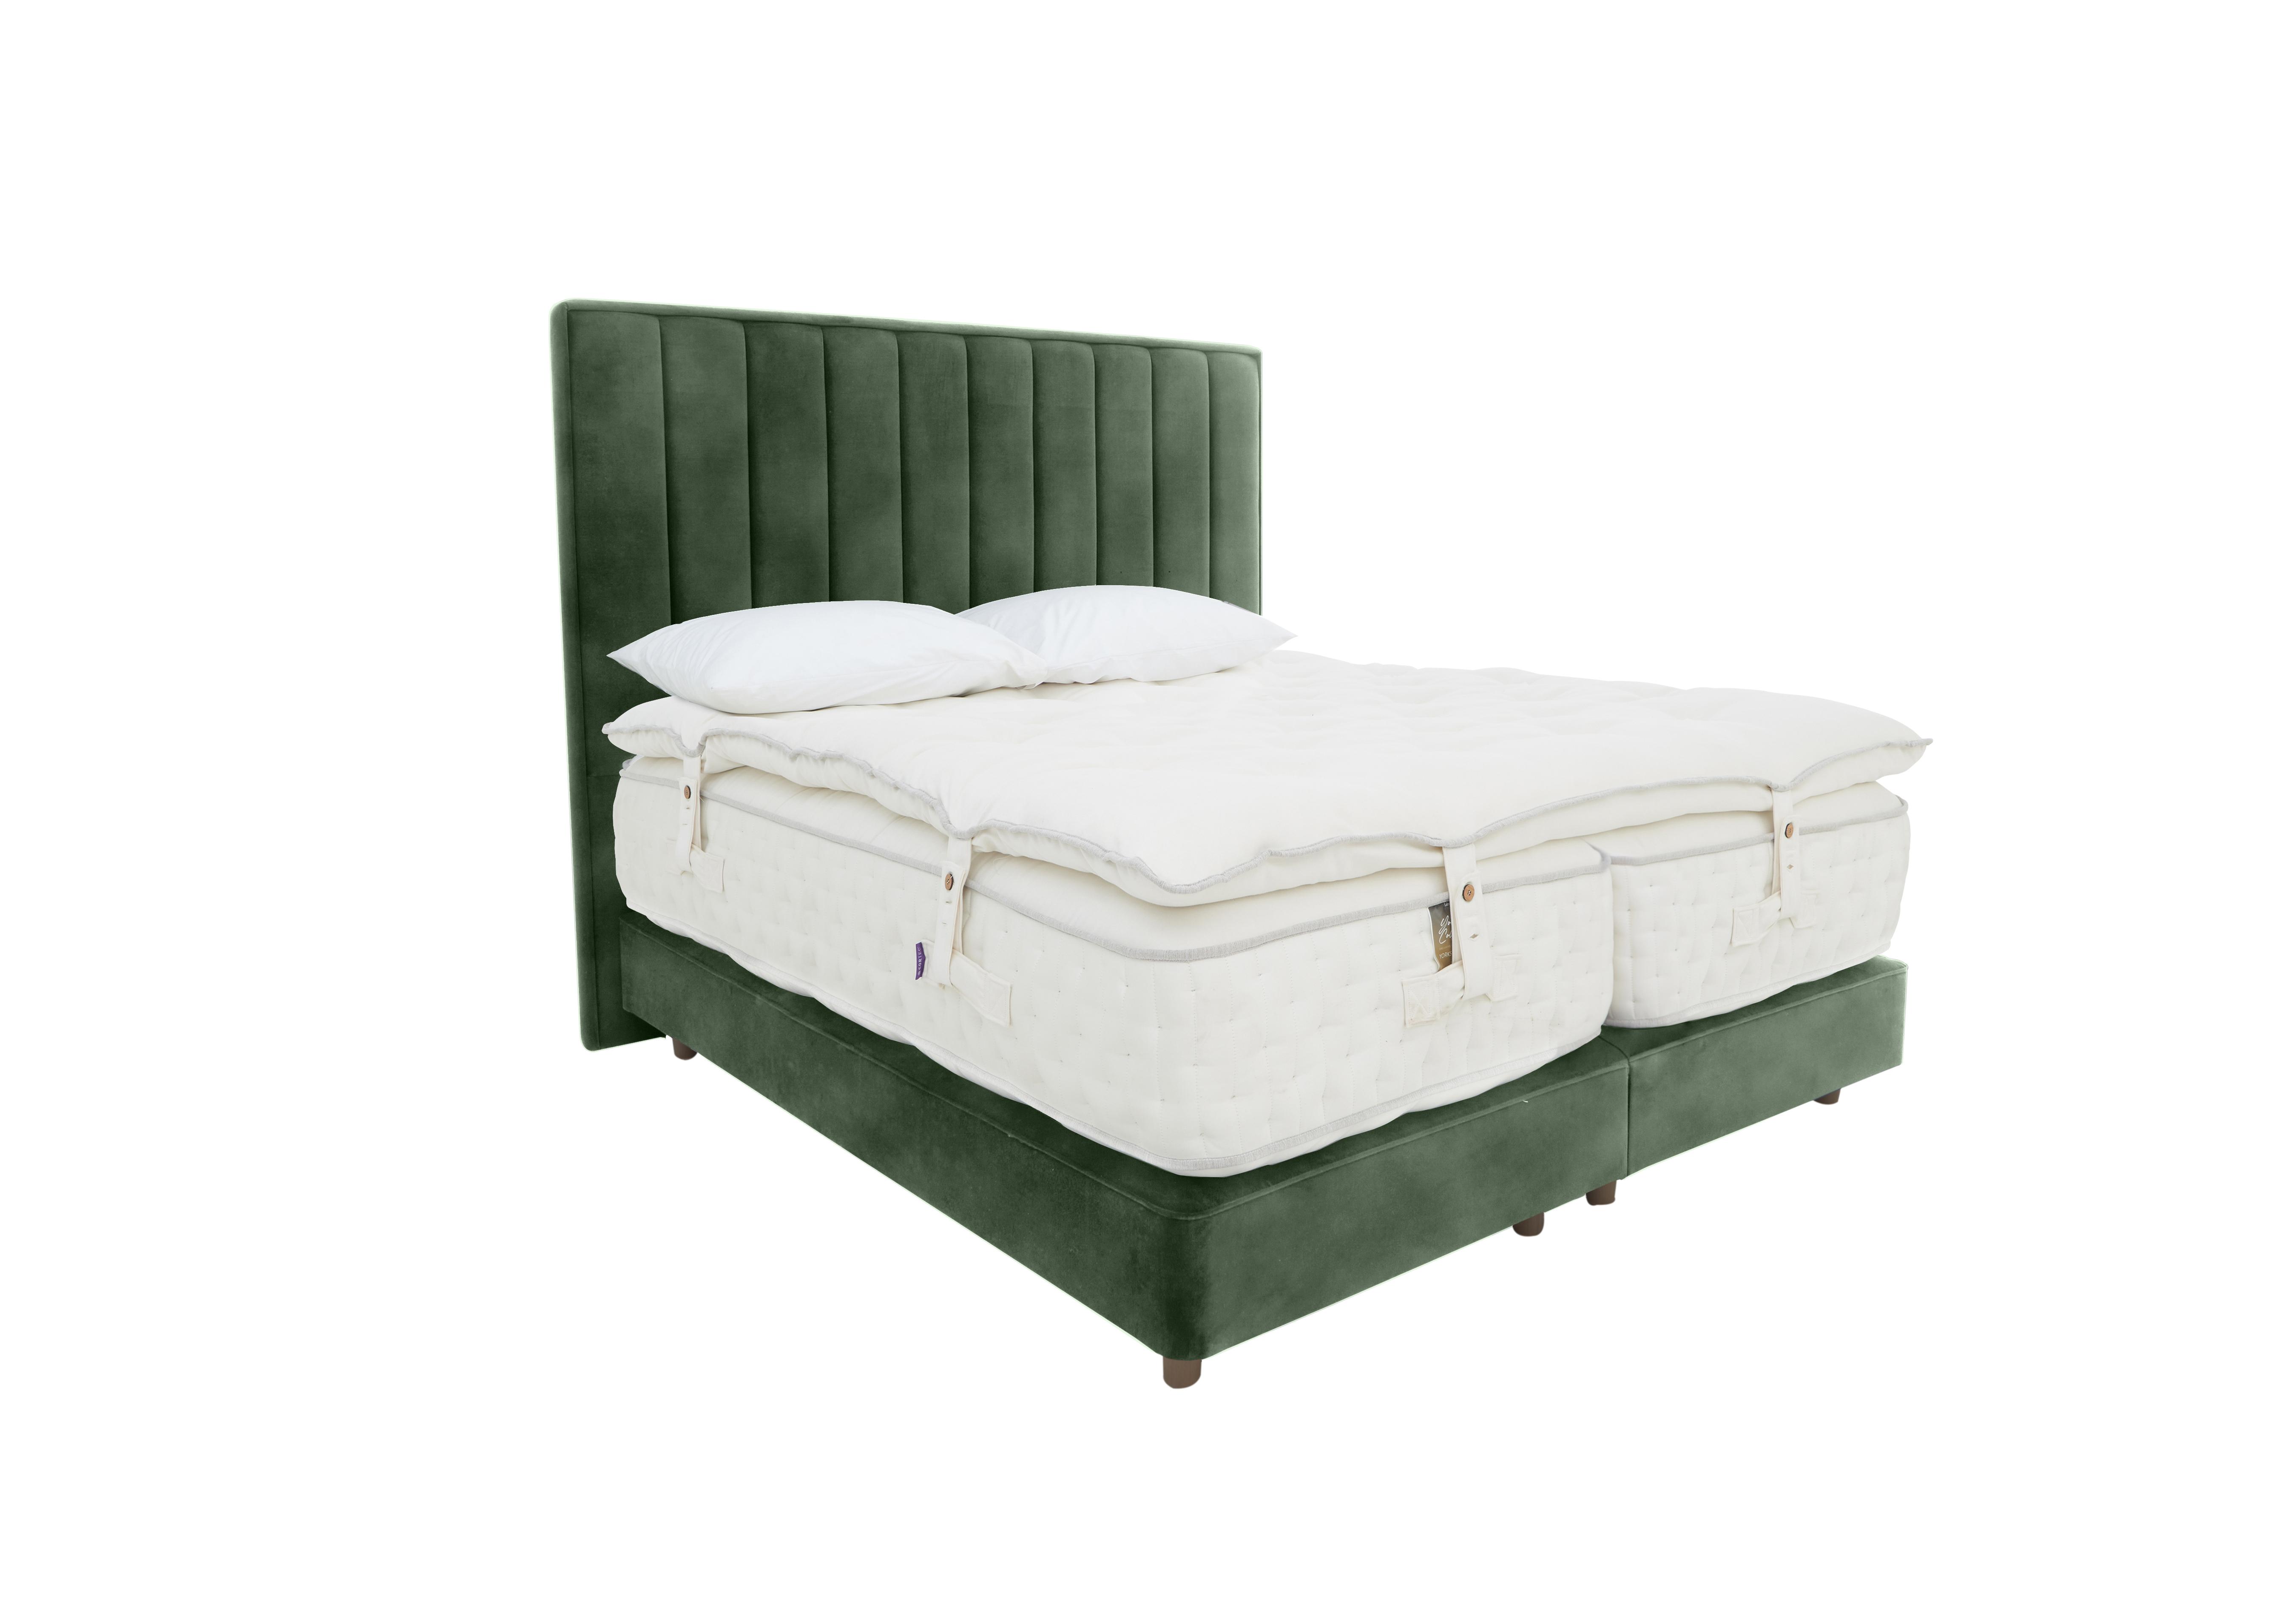 Yorkshire 40K Shallow Divan Set with Zip and Link Mattress with Mattress Topper in Lovely Conifer on Furniture Village